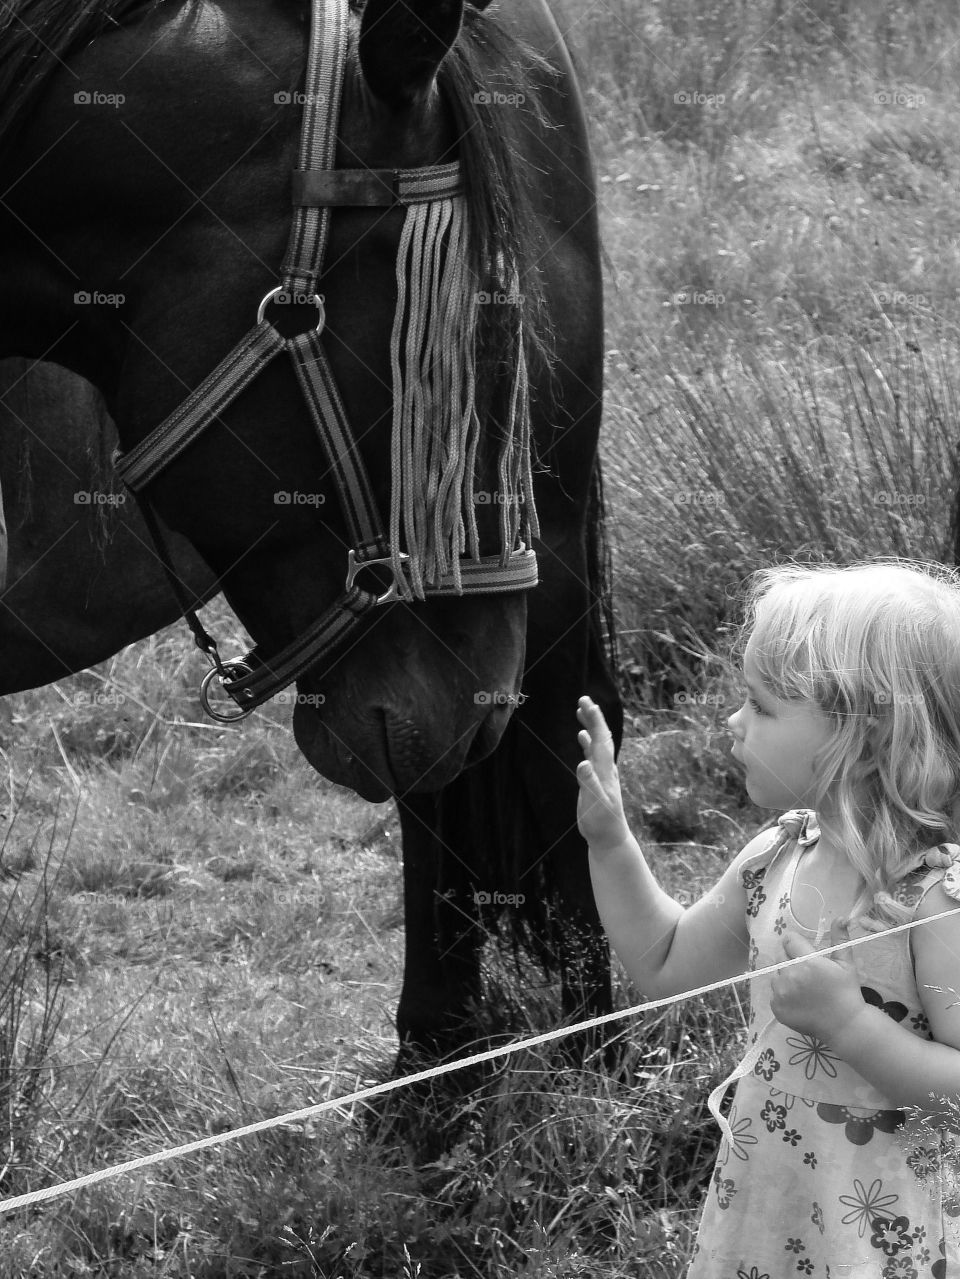 Horse and a girl